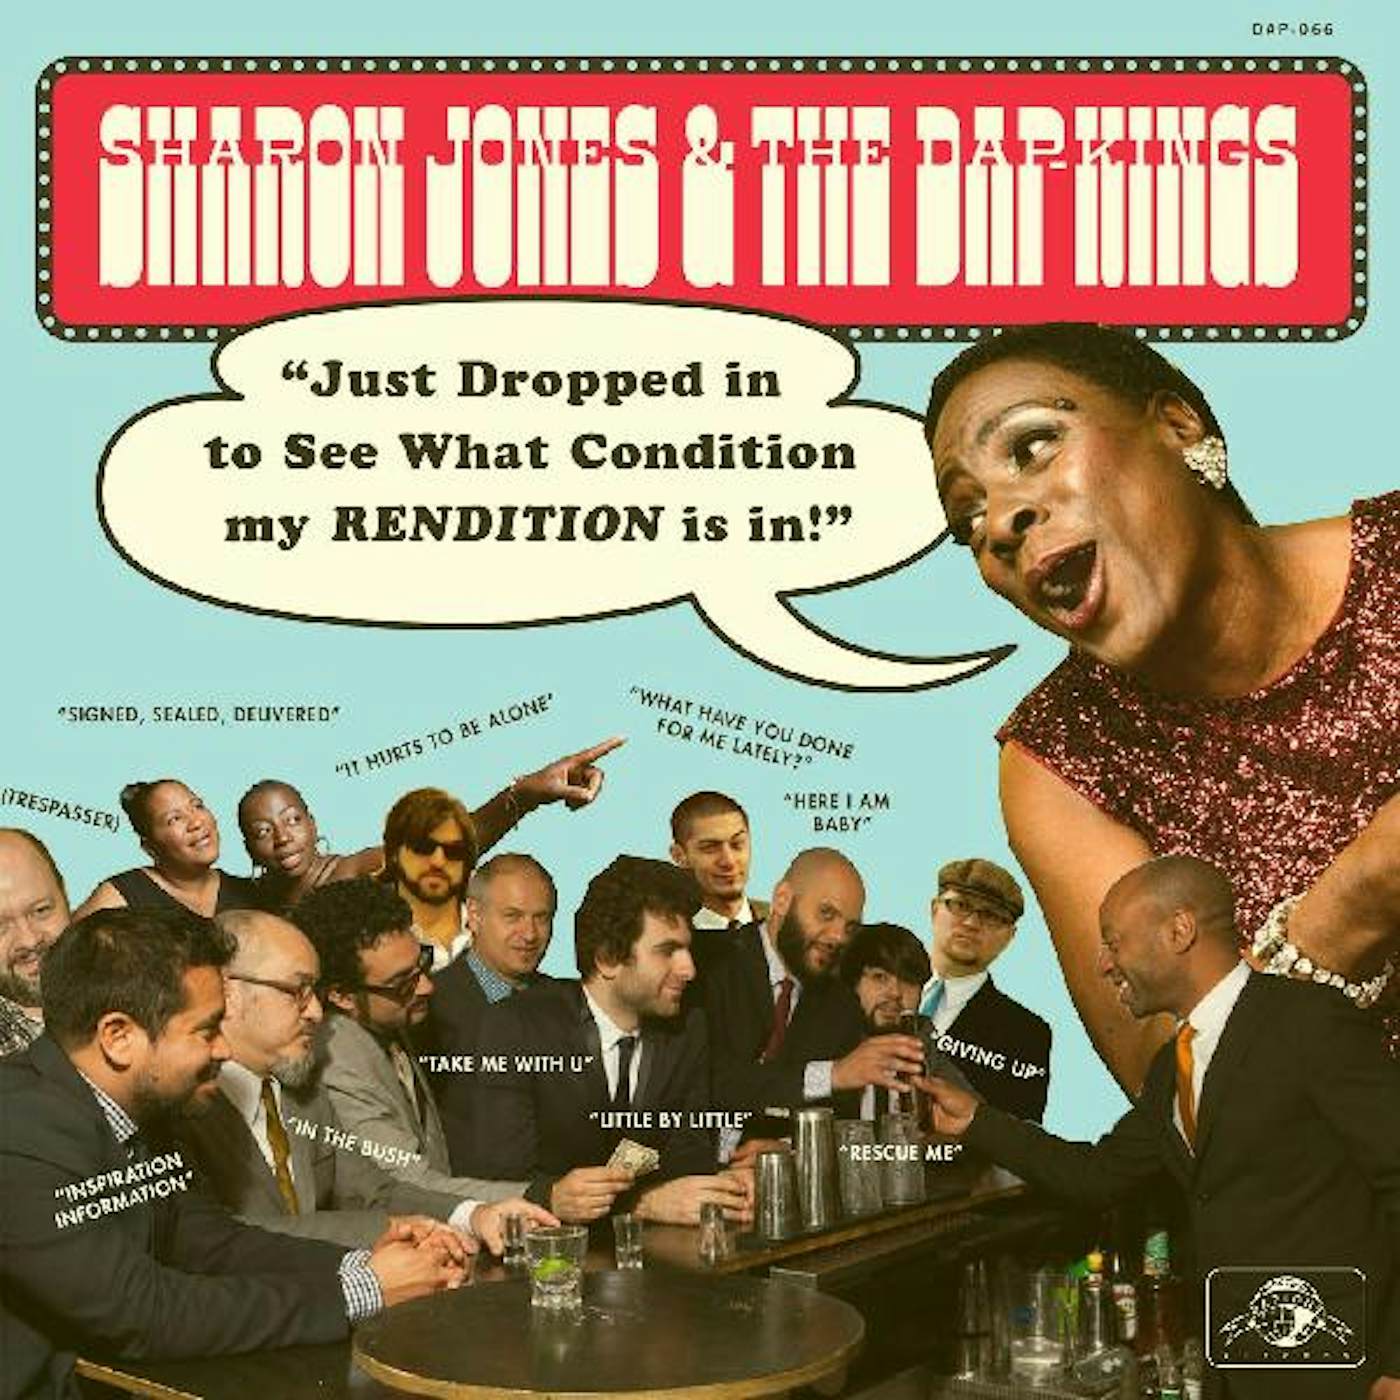 Sharon Jones & The Dap-Kings Just Dropped In (To See What Condition My Rendition Was In) Vinyl Record